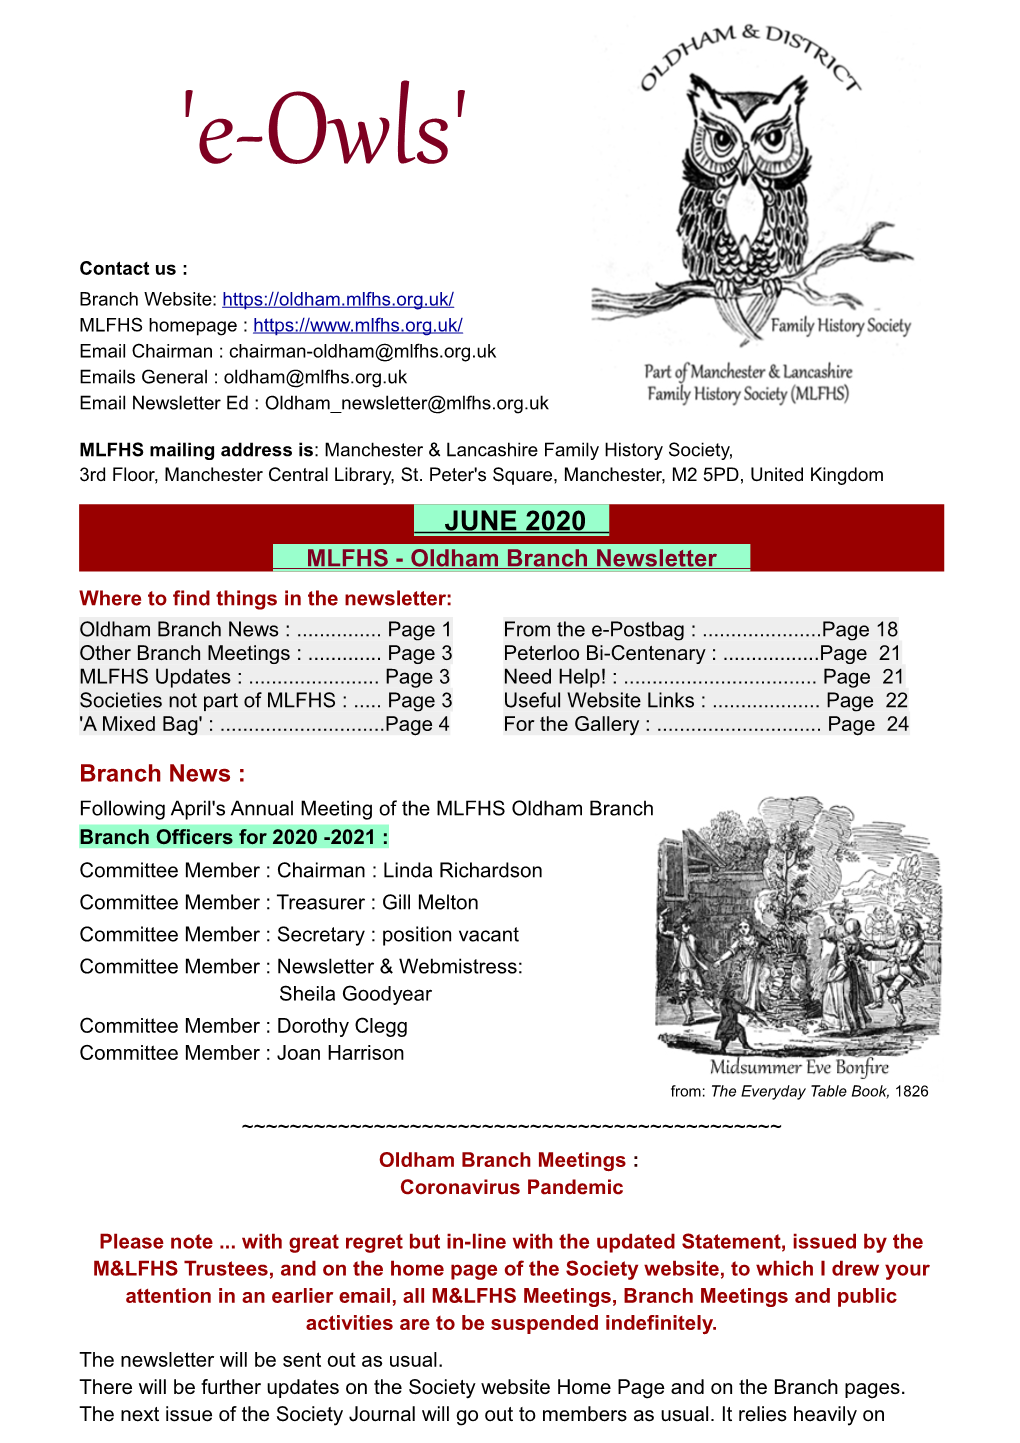 JUNE 2020 MLFHS - Oldham Branch Newsletter Where to Find Things in the Newsletter: Oldham Branch News :